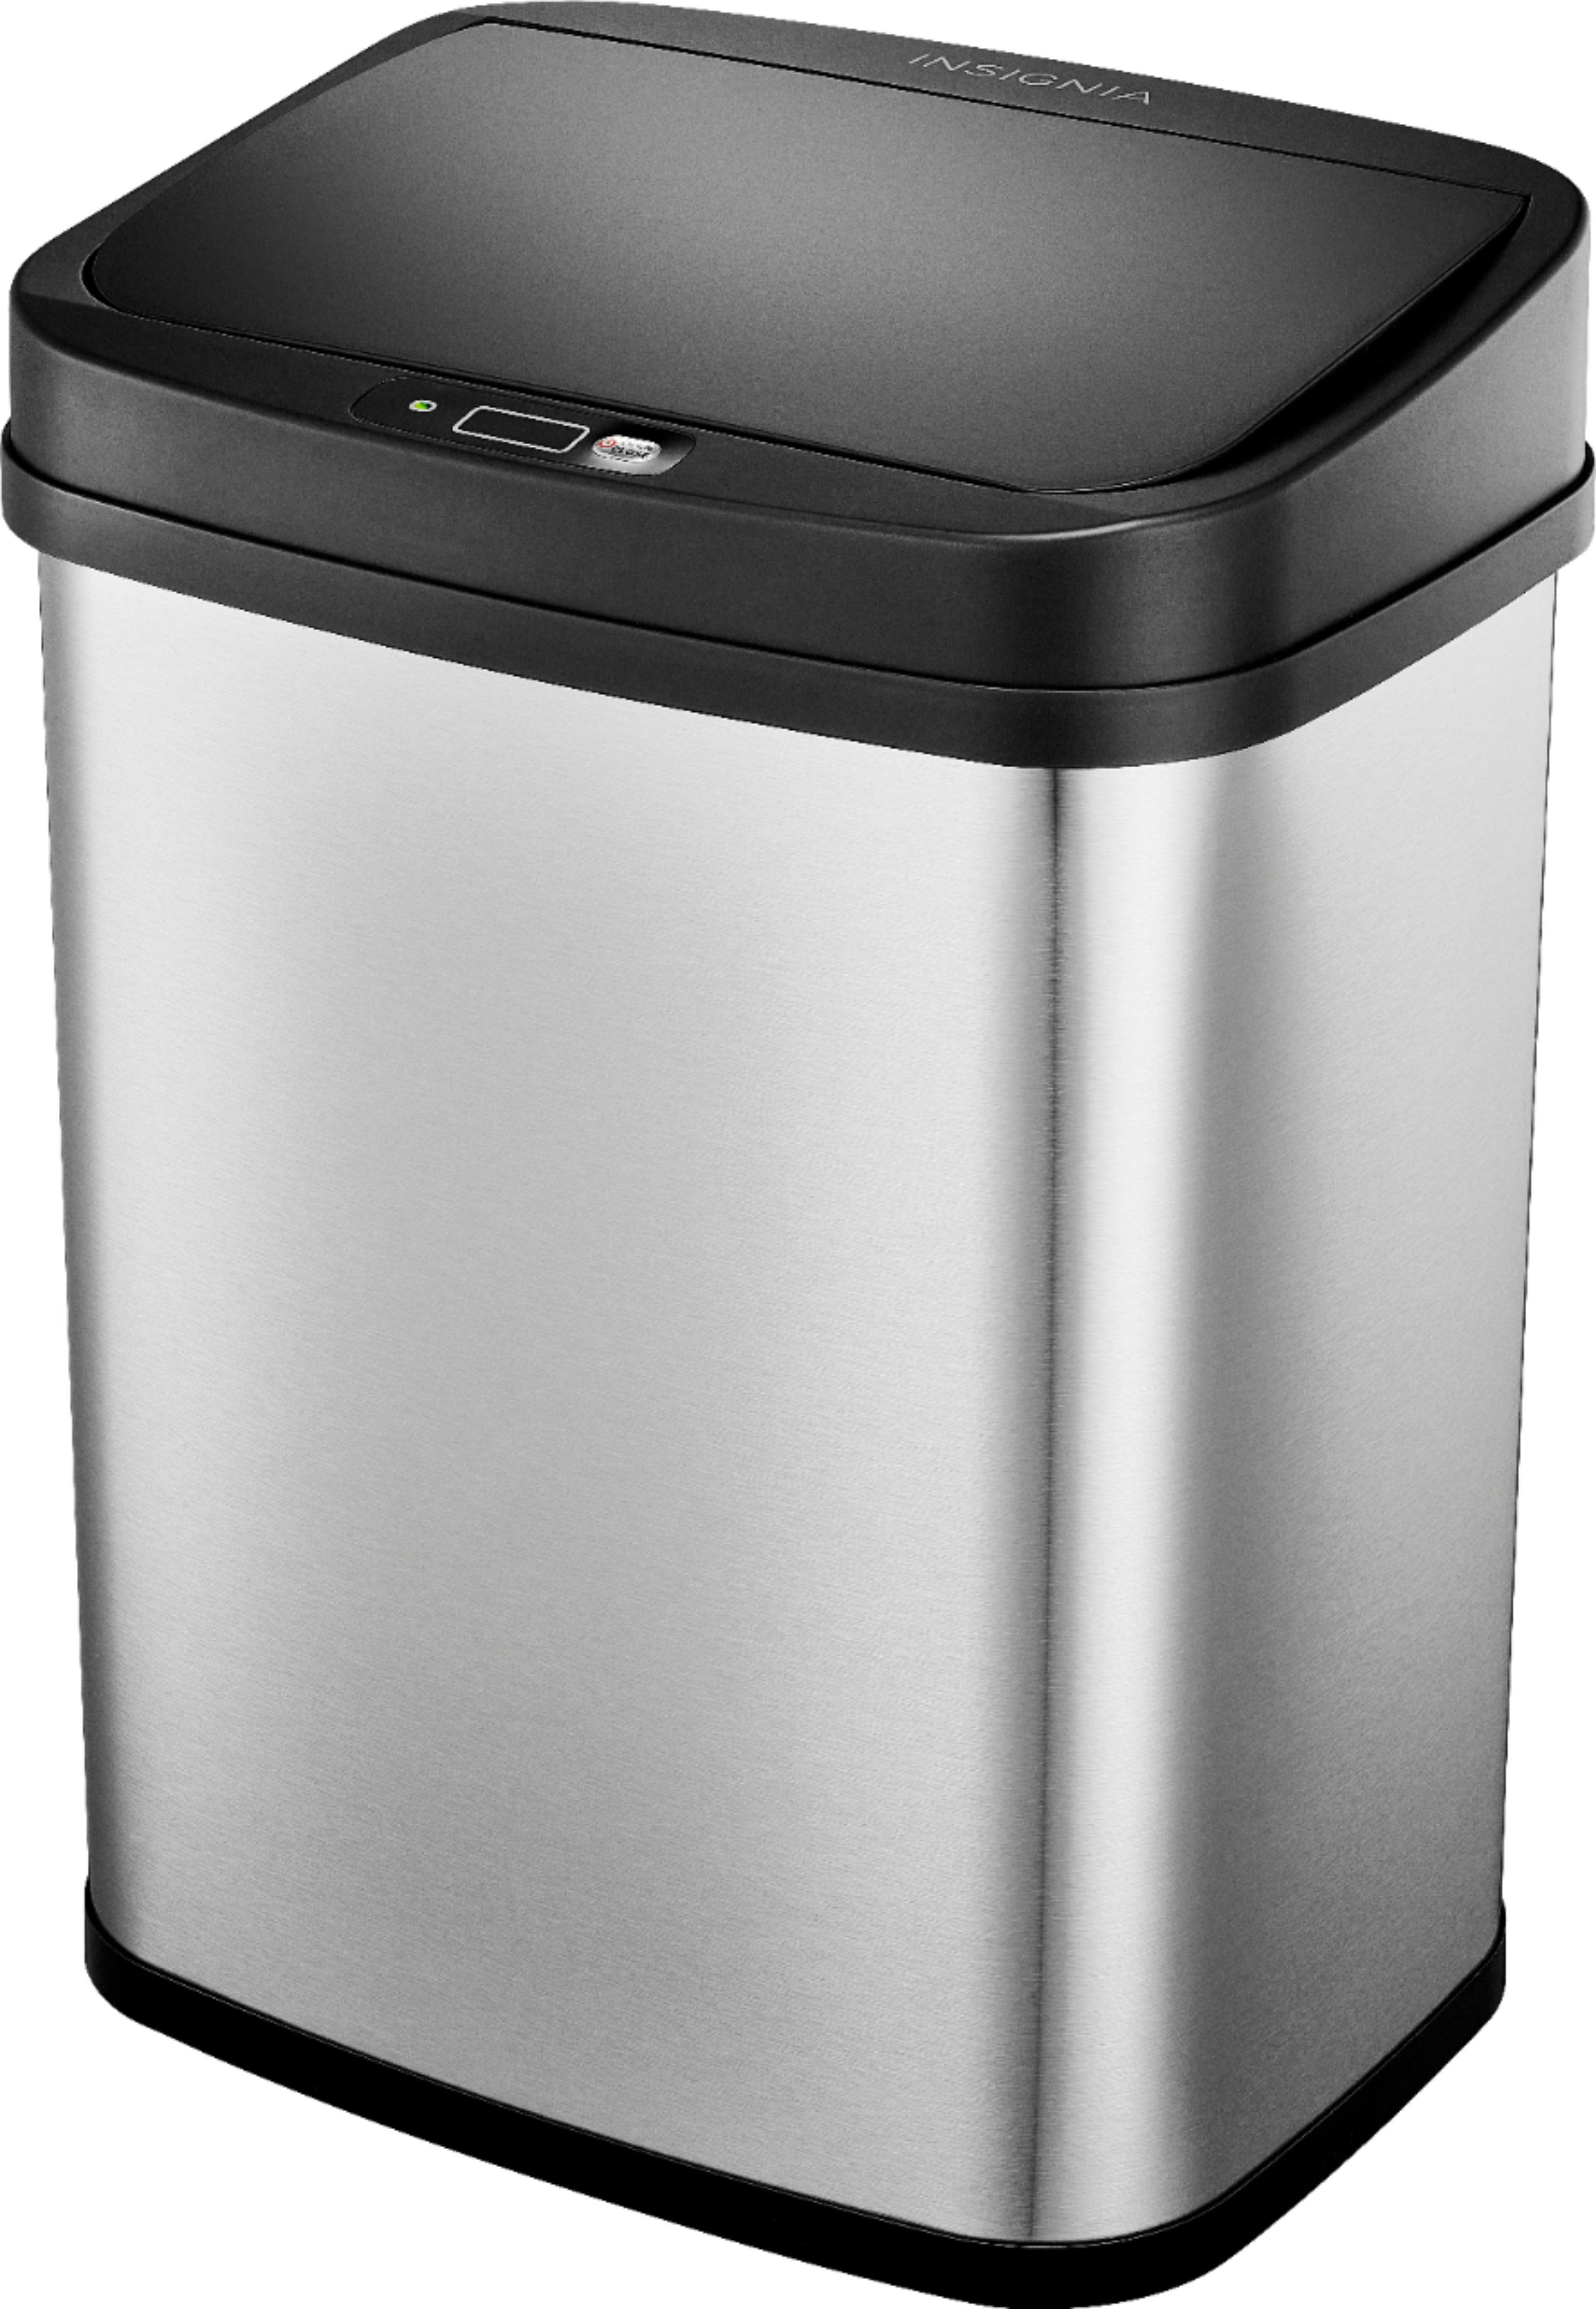 Insignia™ - 3 Gal. Automatic Trash Can - Stainless steel, $19.99, free store pickup, Best Buy